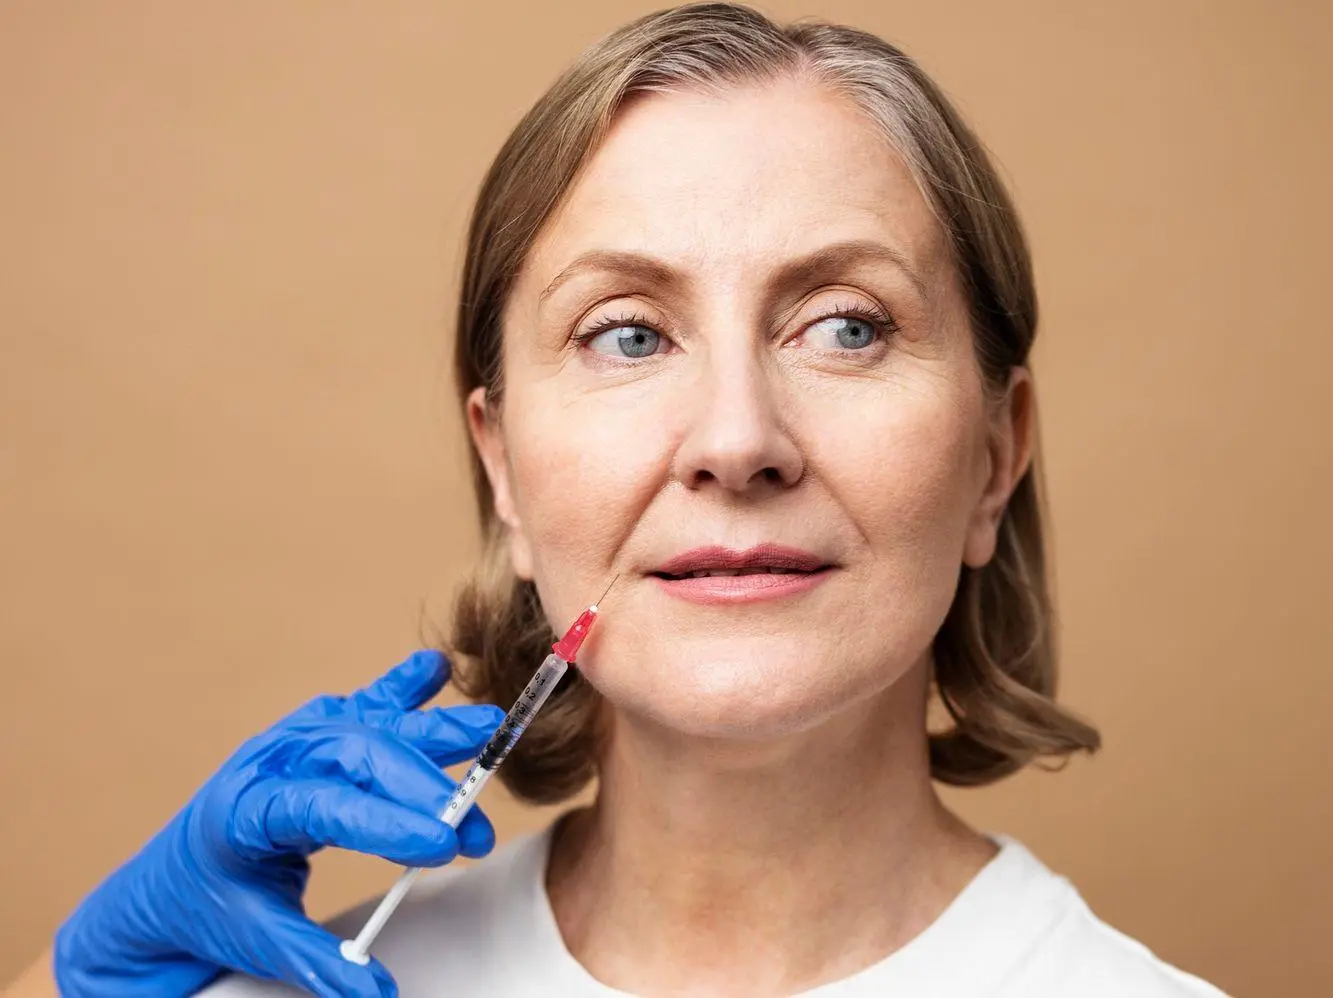 Botox Injections for Wrinkles cost in Riyadh